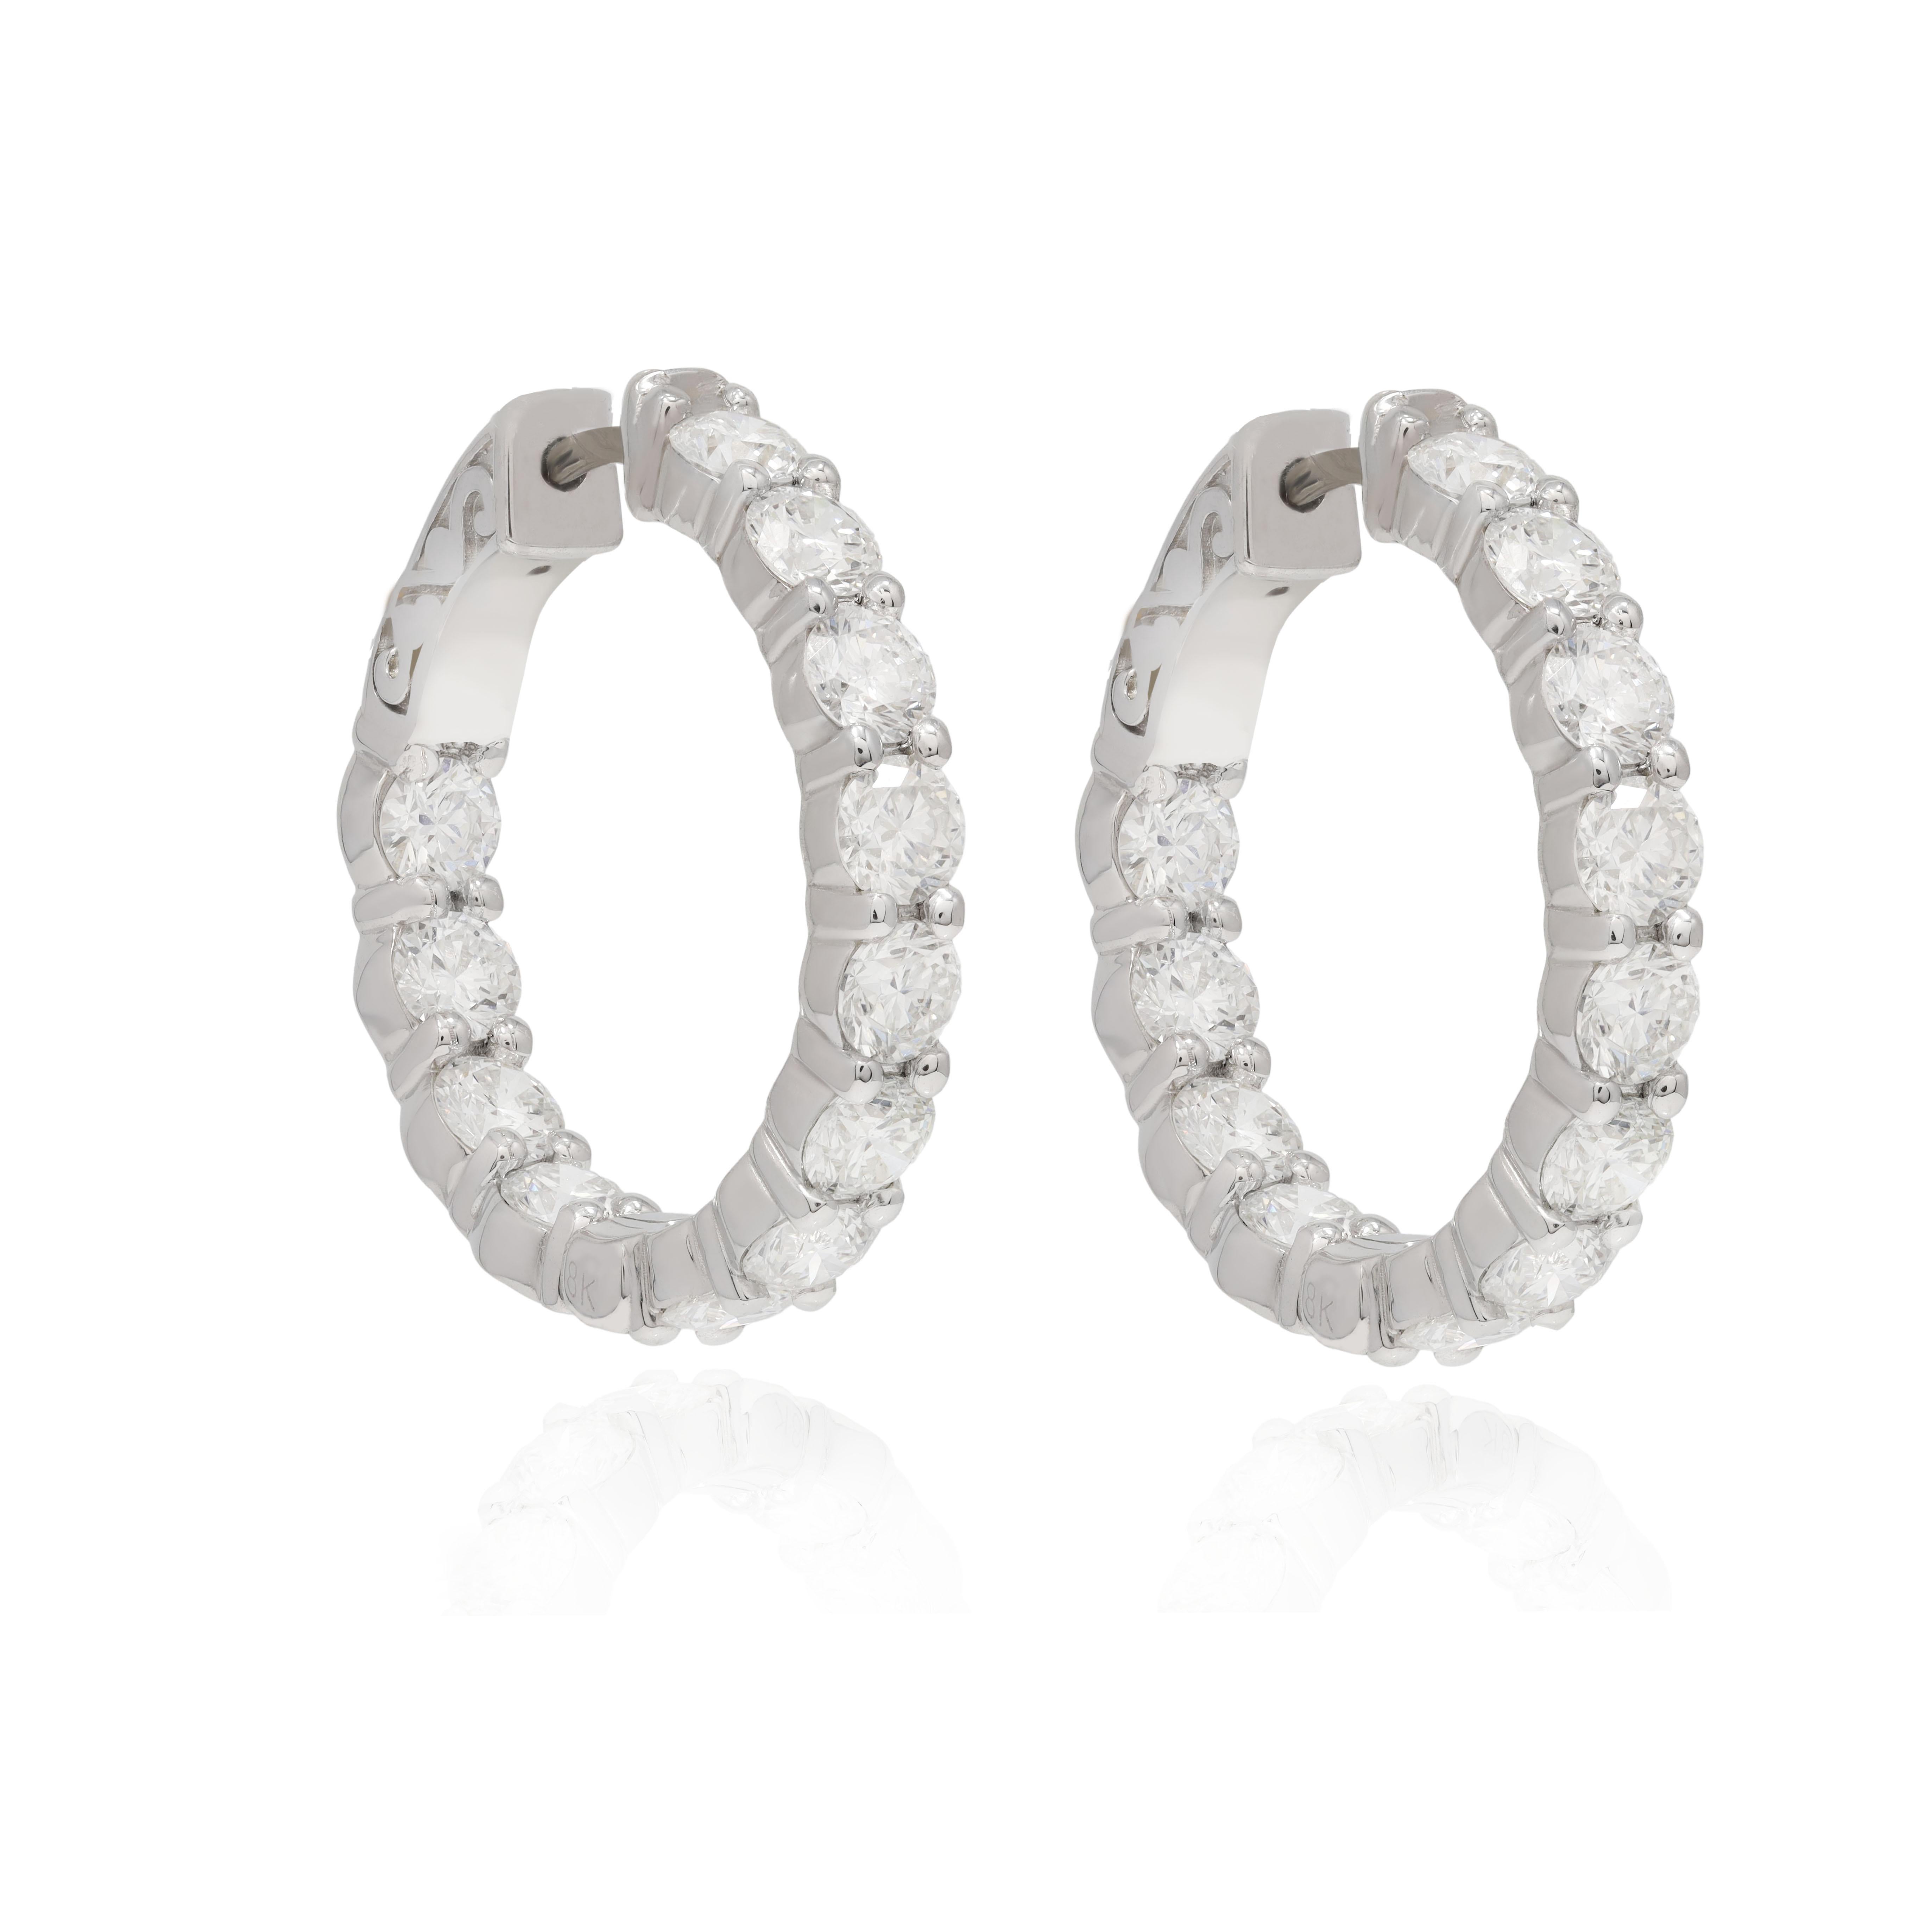 Diana M. 18K White Gold 4.50 Carat Diamond Hoop Earrings In New Condition For Sale In New York, NY